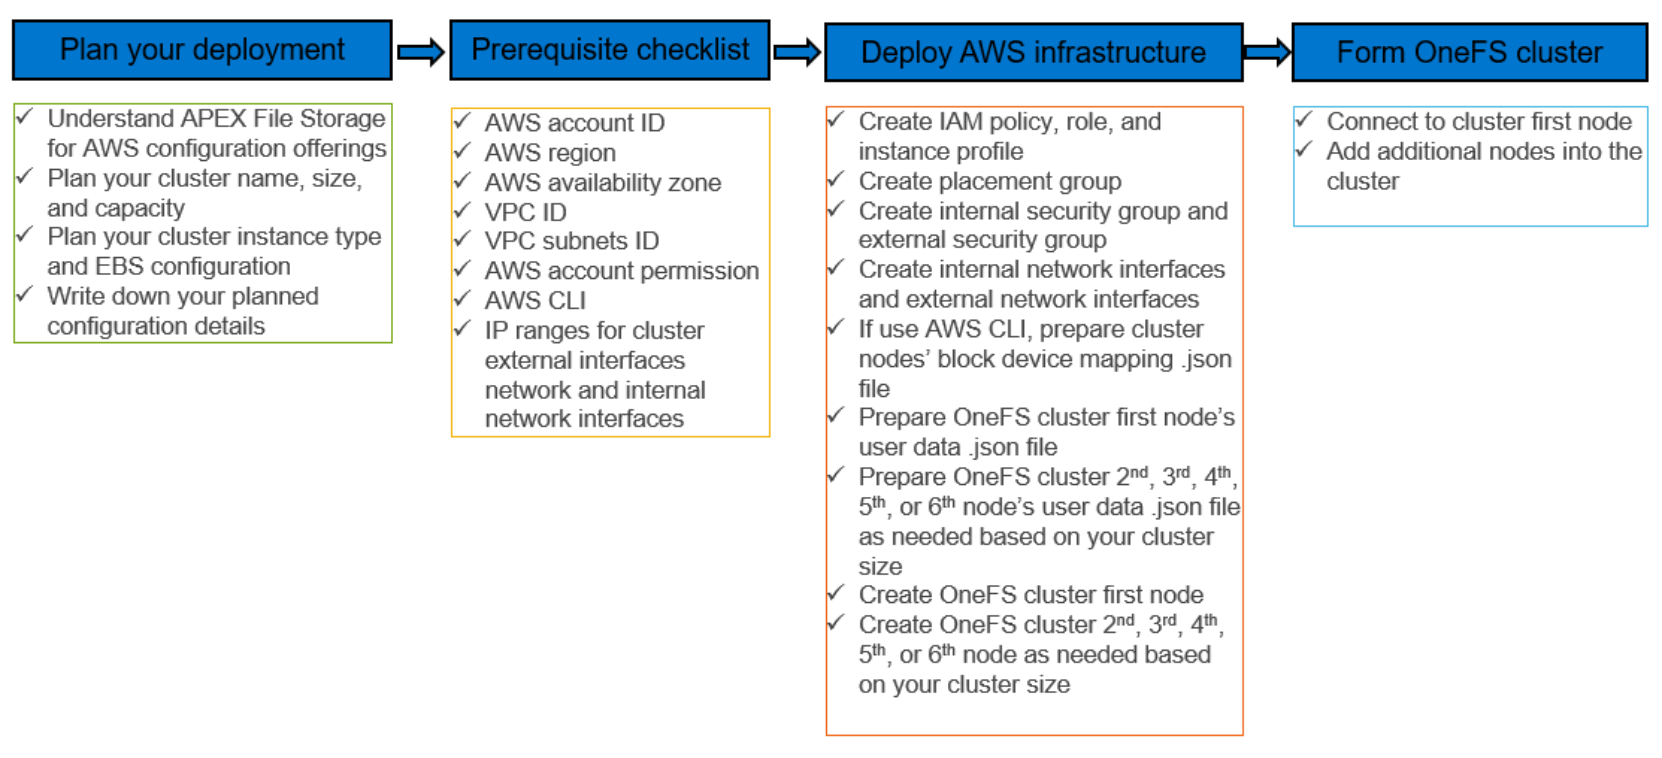 This figure shows a Deployment overview that includes:Plan your deployment,Prerequisite checklist,Deploy AWS infrastructure, and Form OneFS cluster.